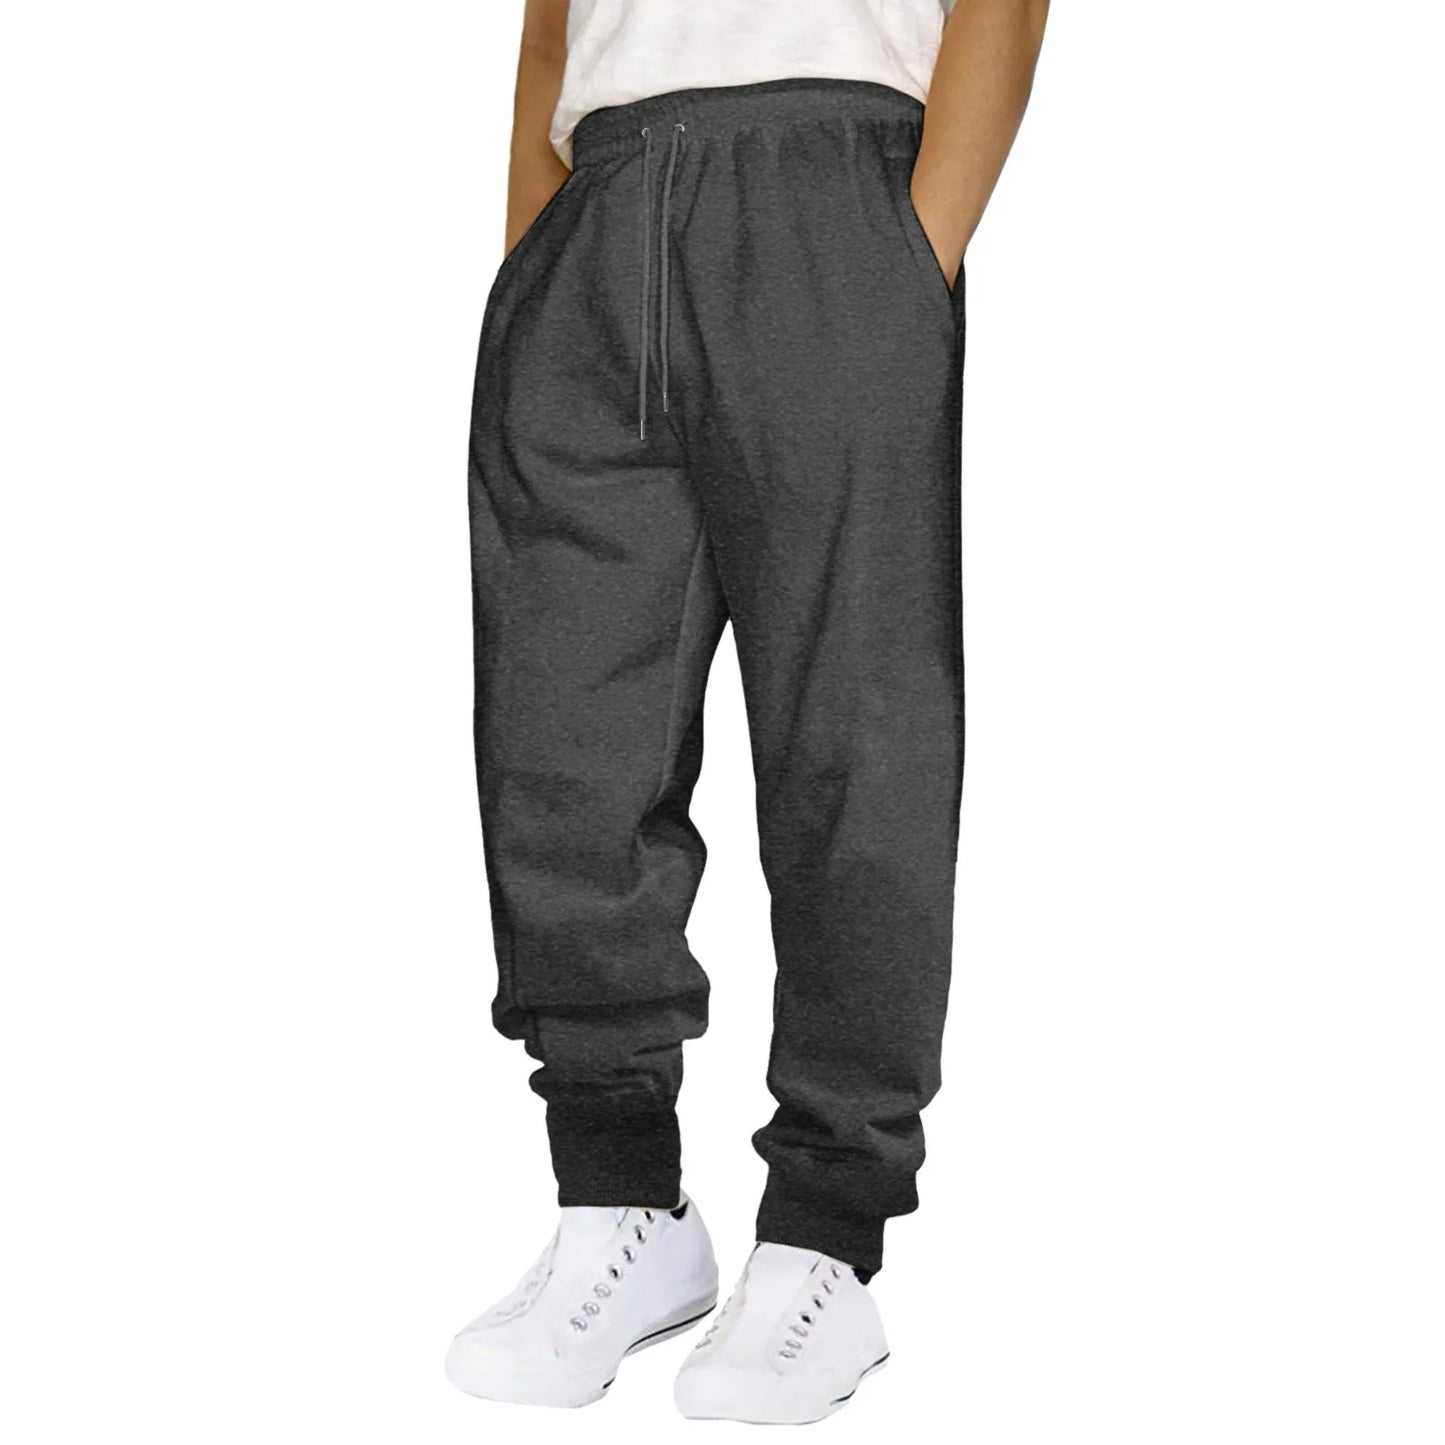 cargo trousers mens